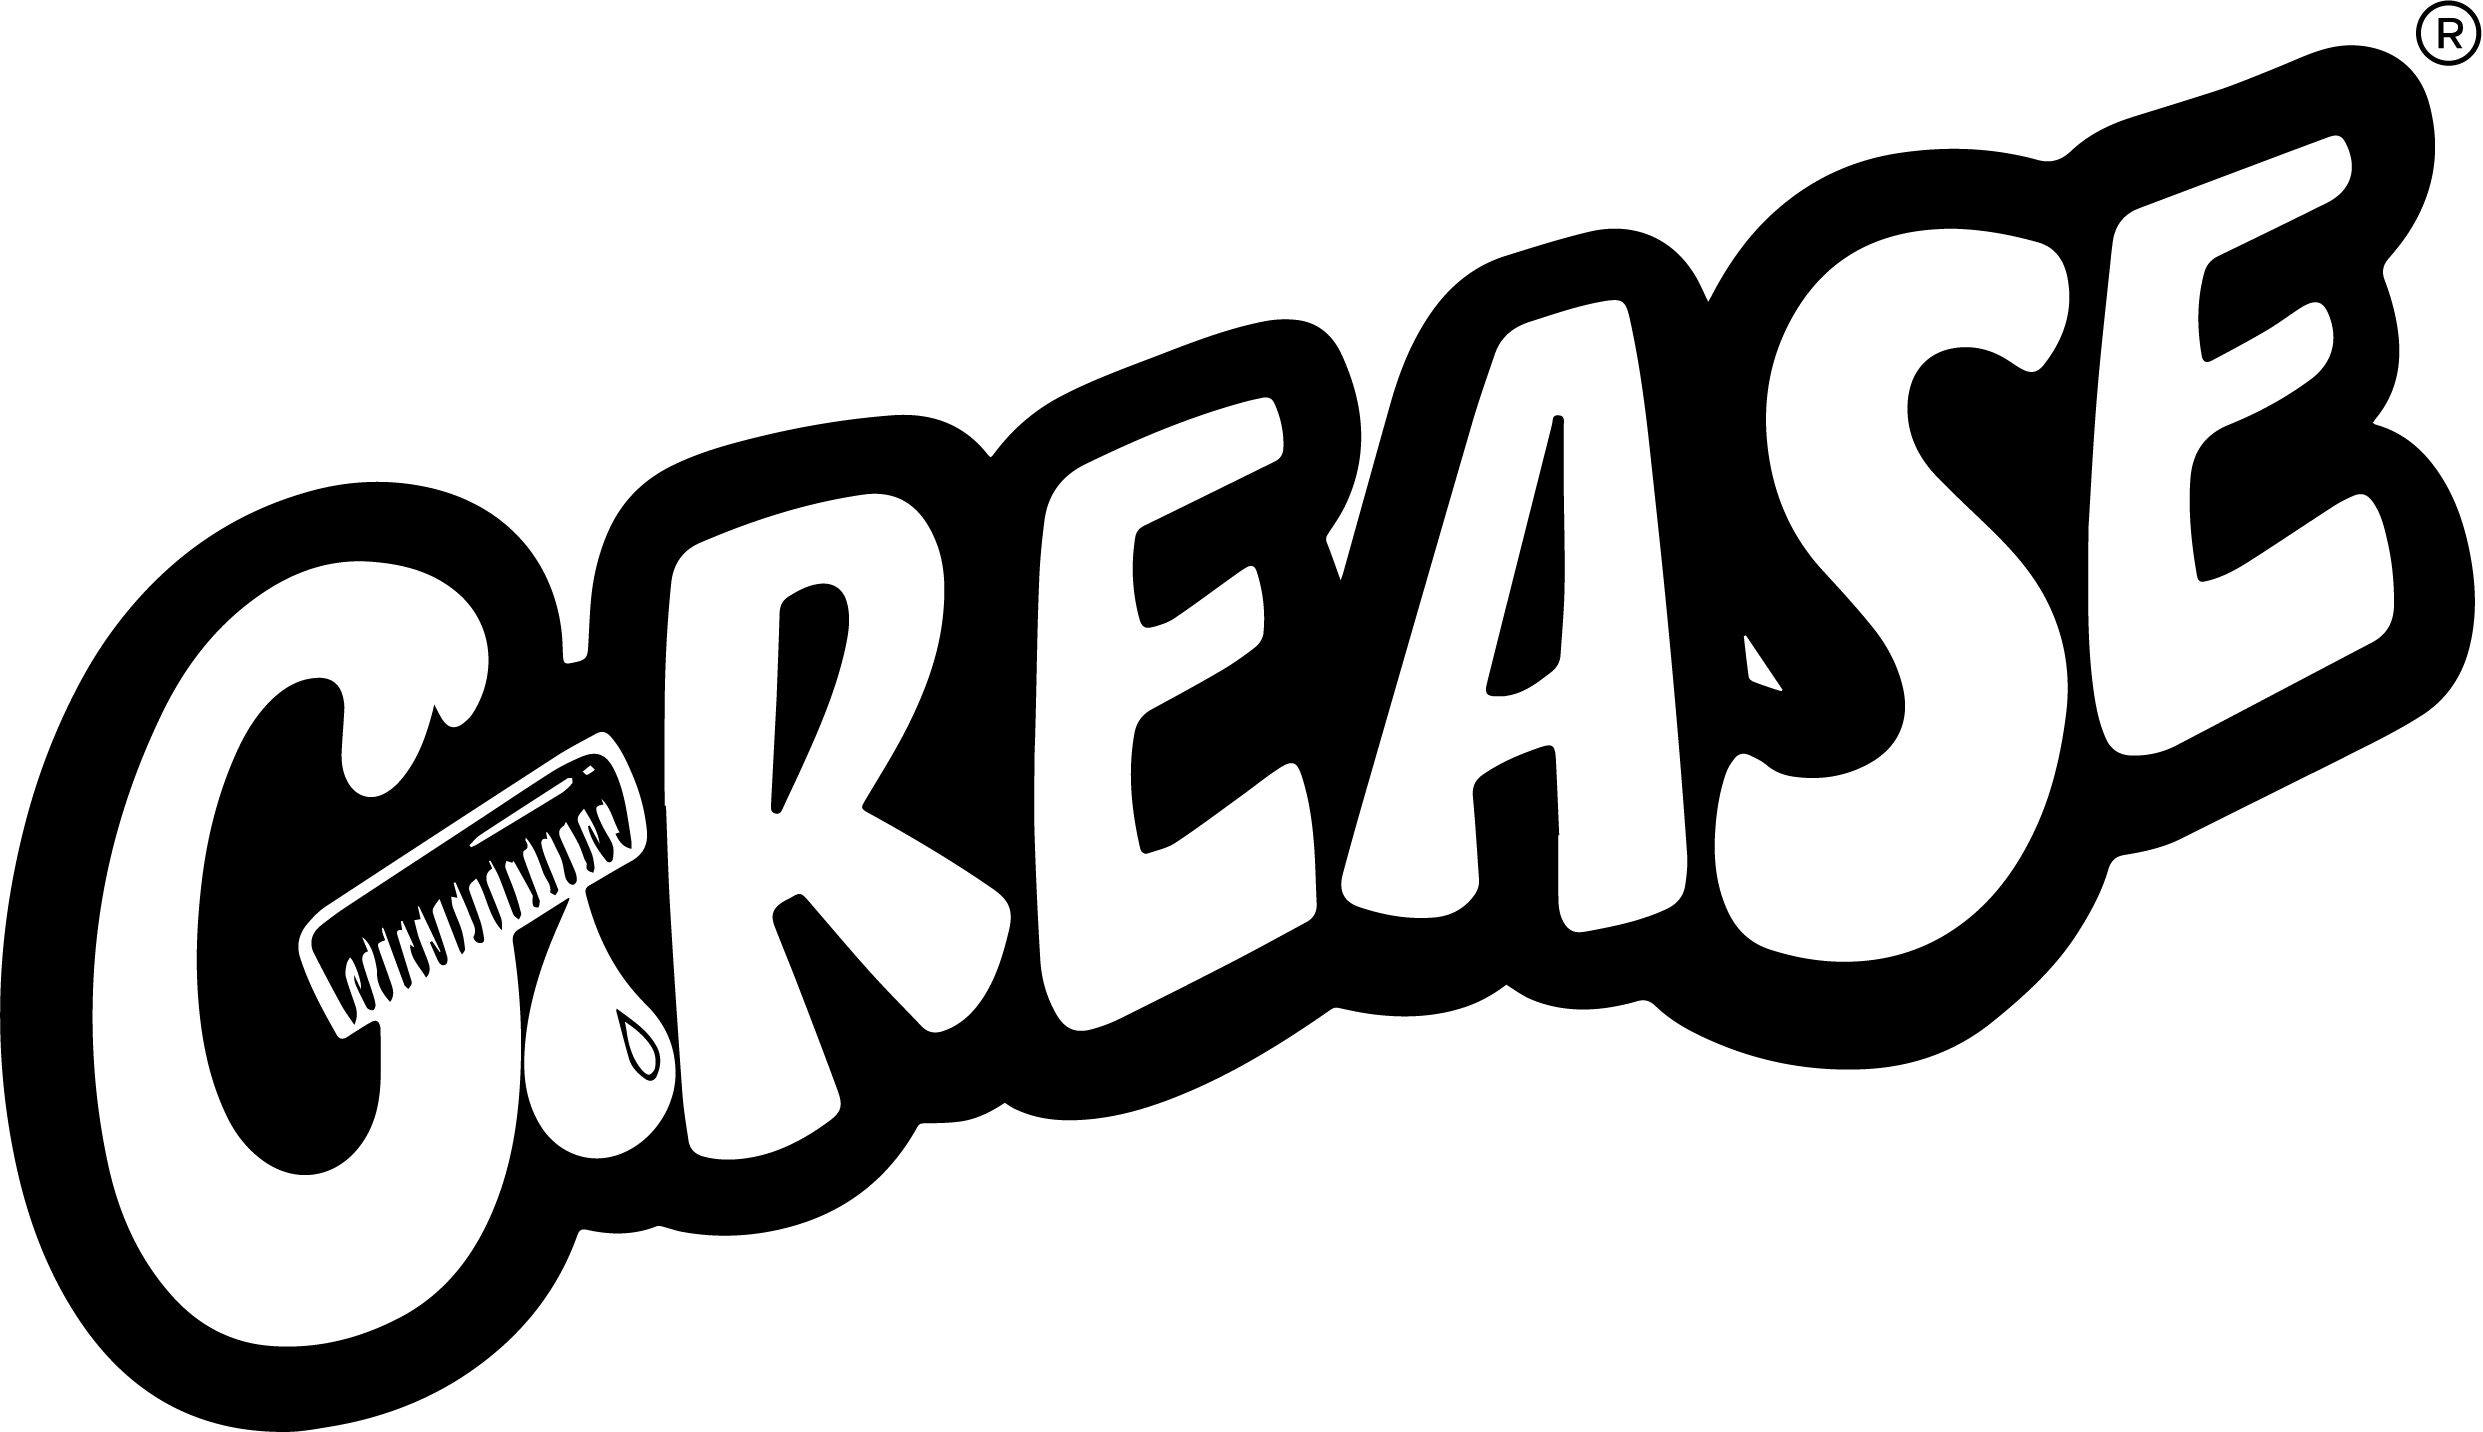 Grease The Musical Logo Clipart - Large Size Png Image - PikPng.